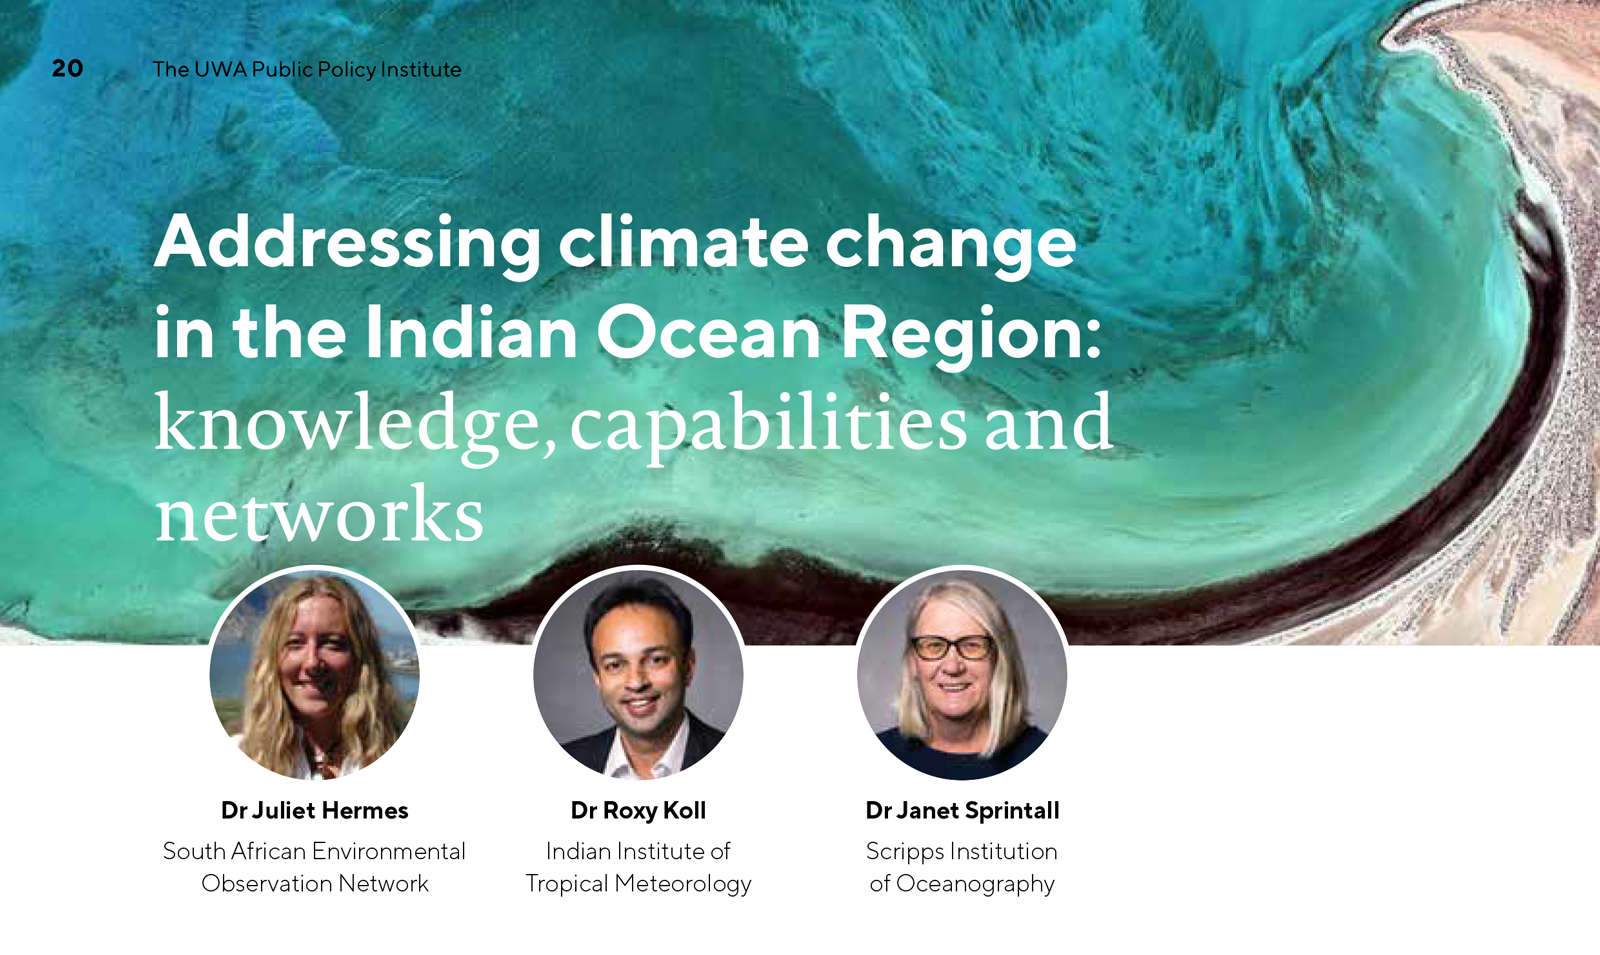 Addressing climate change in the Indian Ocean Region: knowledge, capabilities and networks. Indian Ocean Futures, published by the UWA Public Policy Institute.